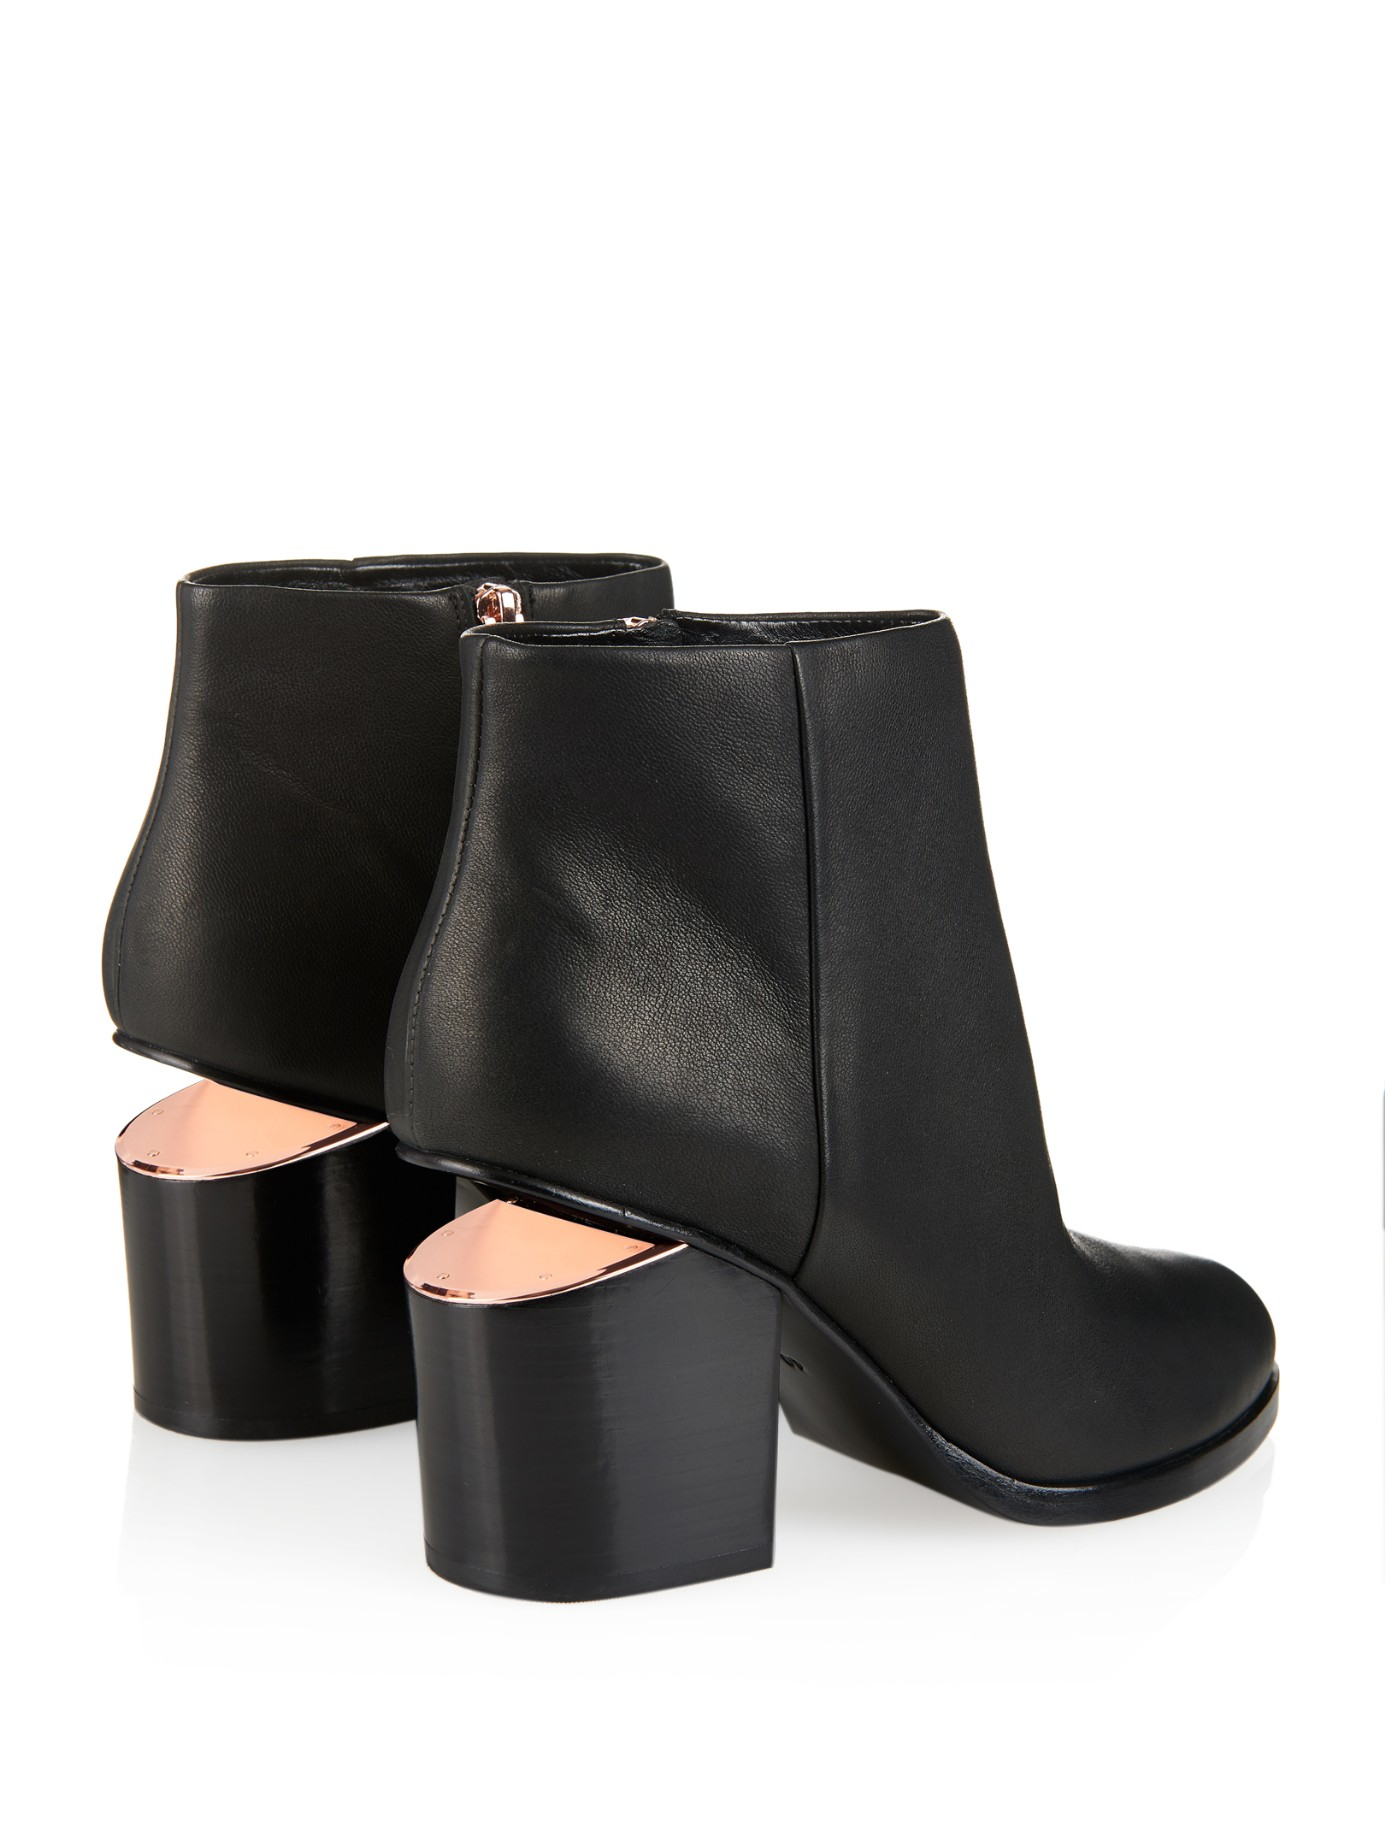 Alexander wang Gabi Leather Ankle Boots in Black | Lyst